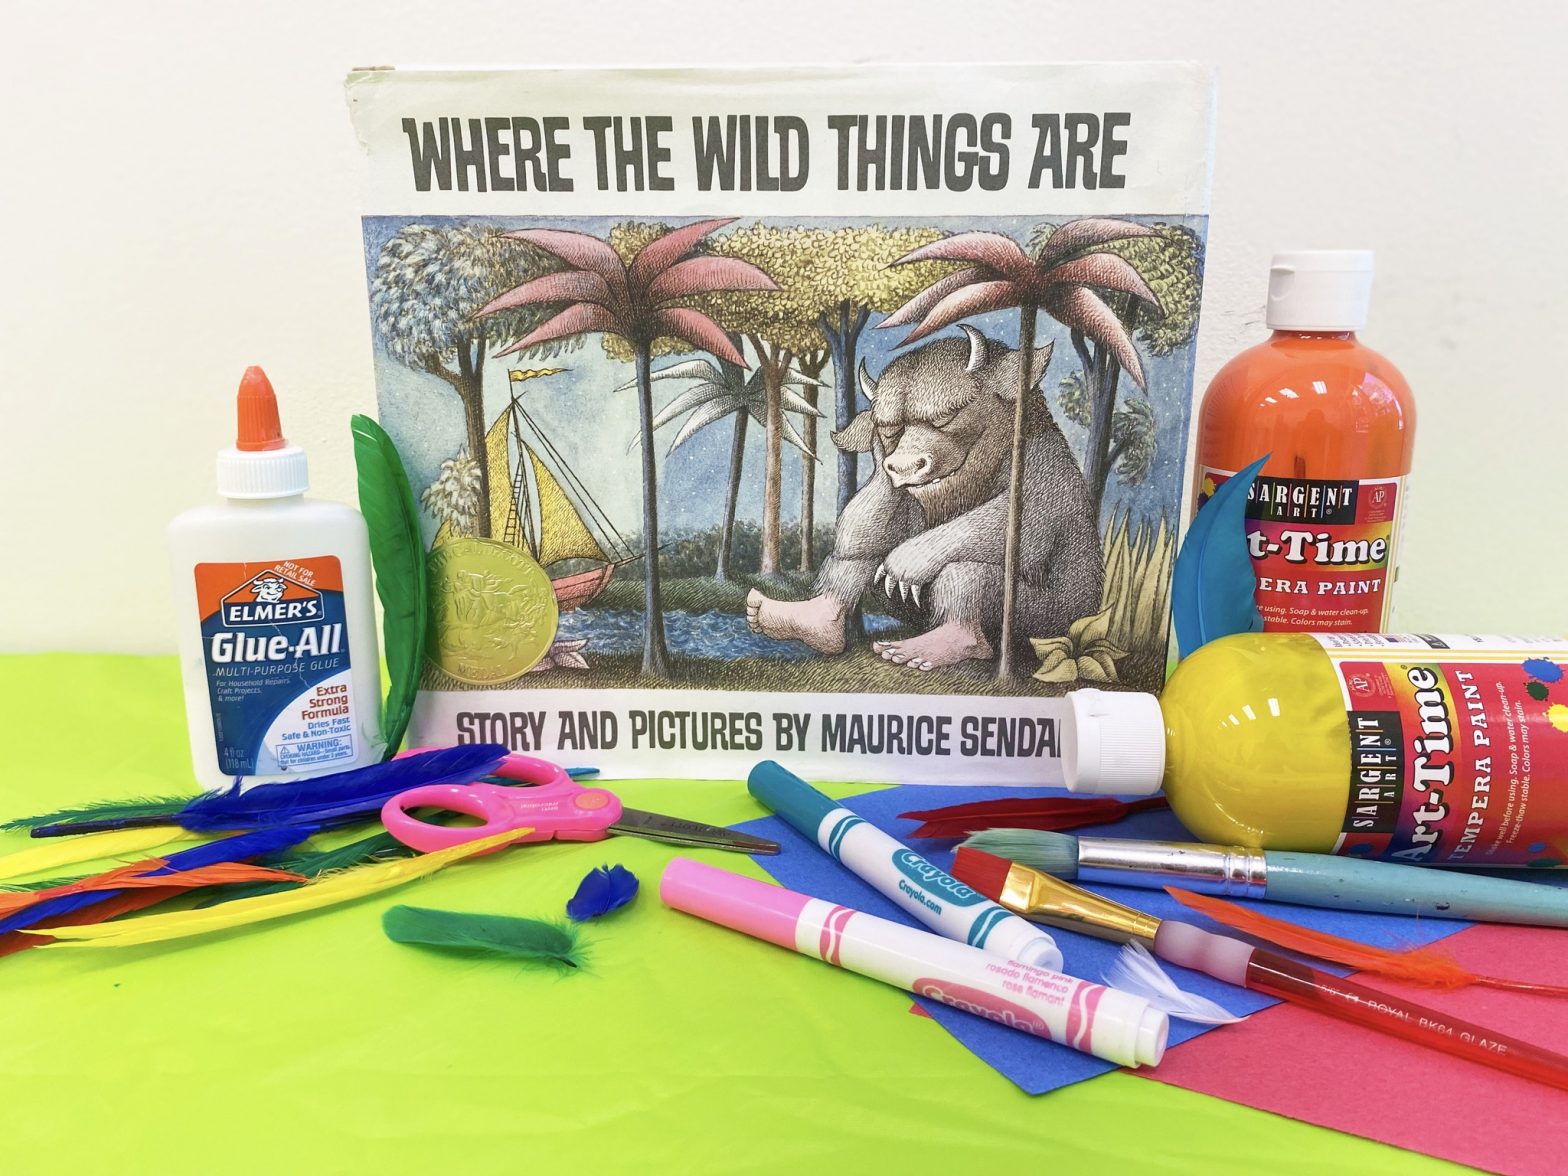 Orlando Museum of Art | Art Adventures: Where the Wild Things Are!